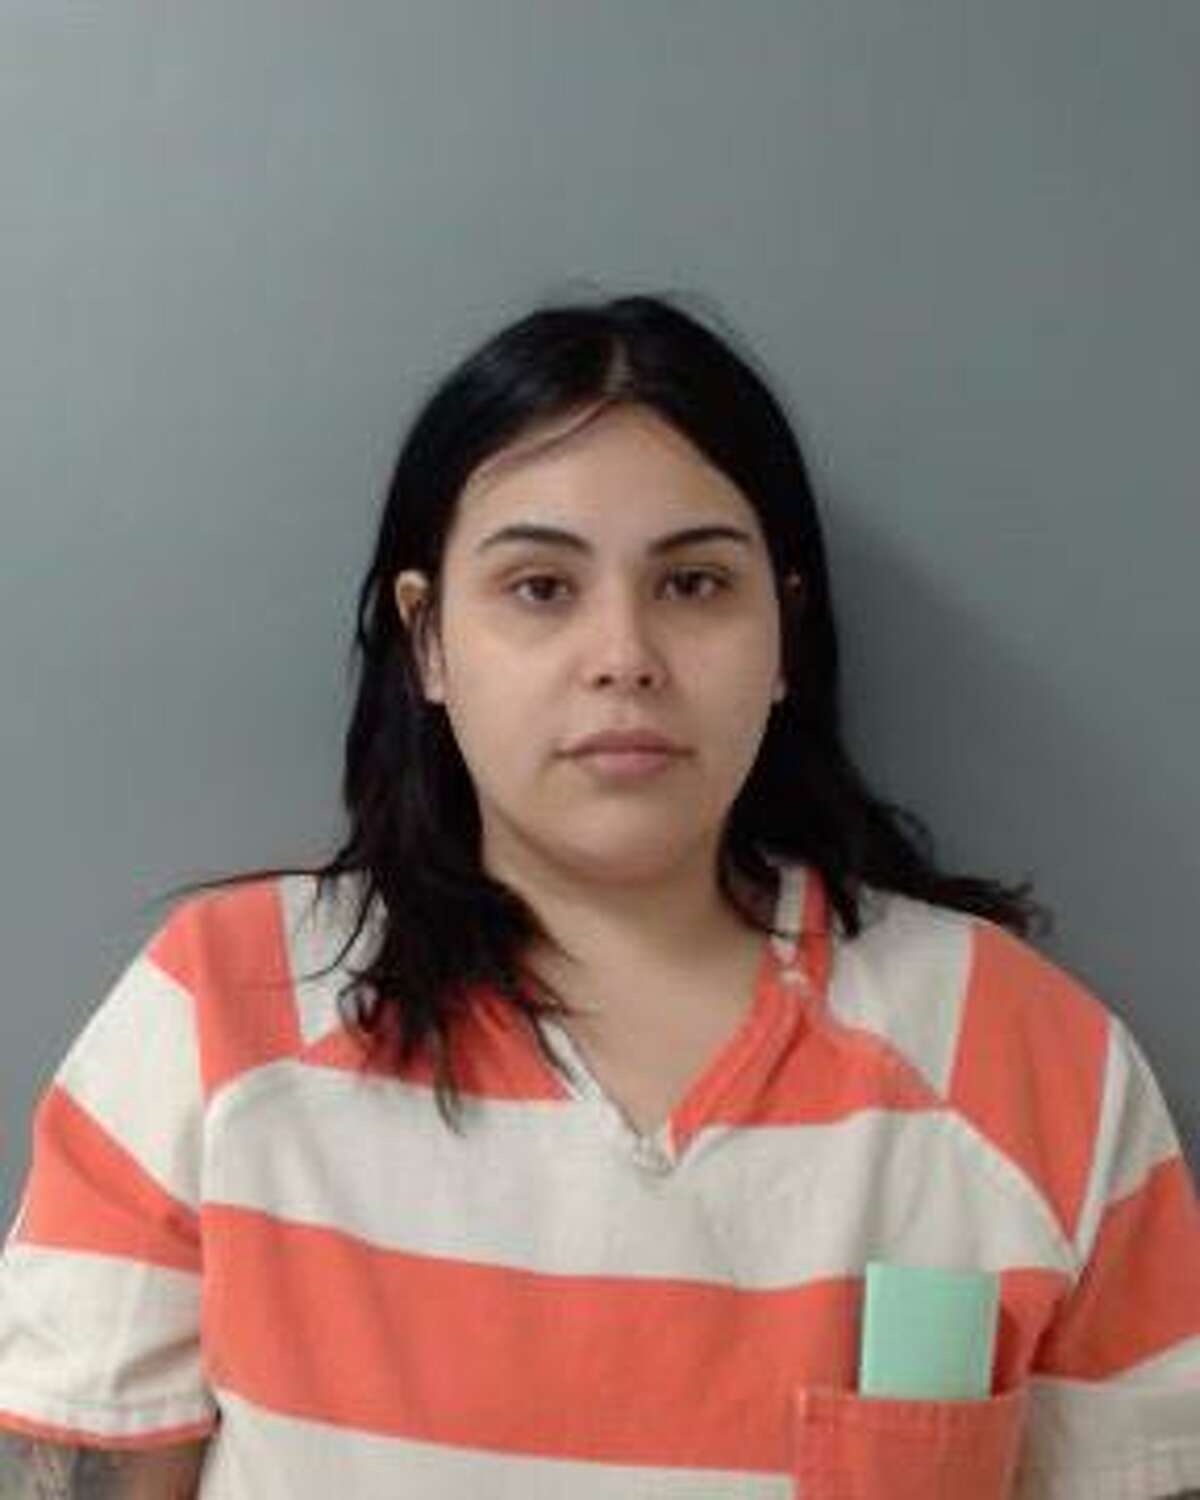 Laredo PD Woman posted video of couple having sex on Facebook